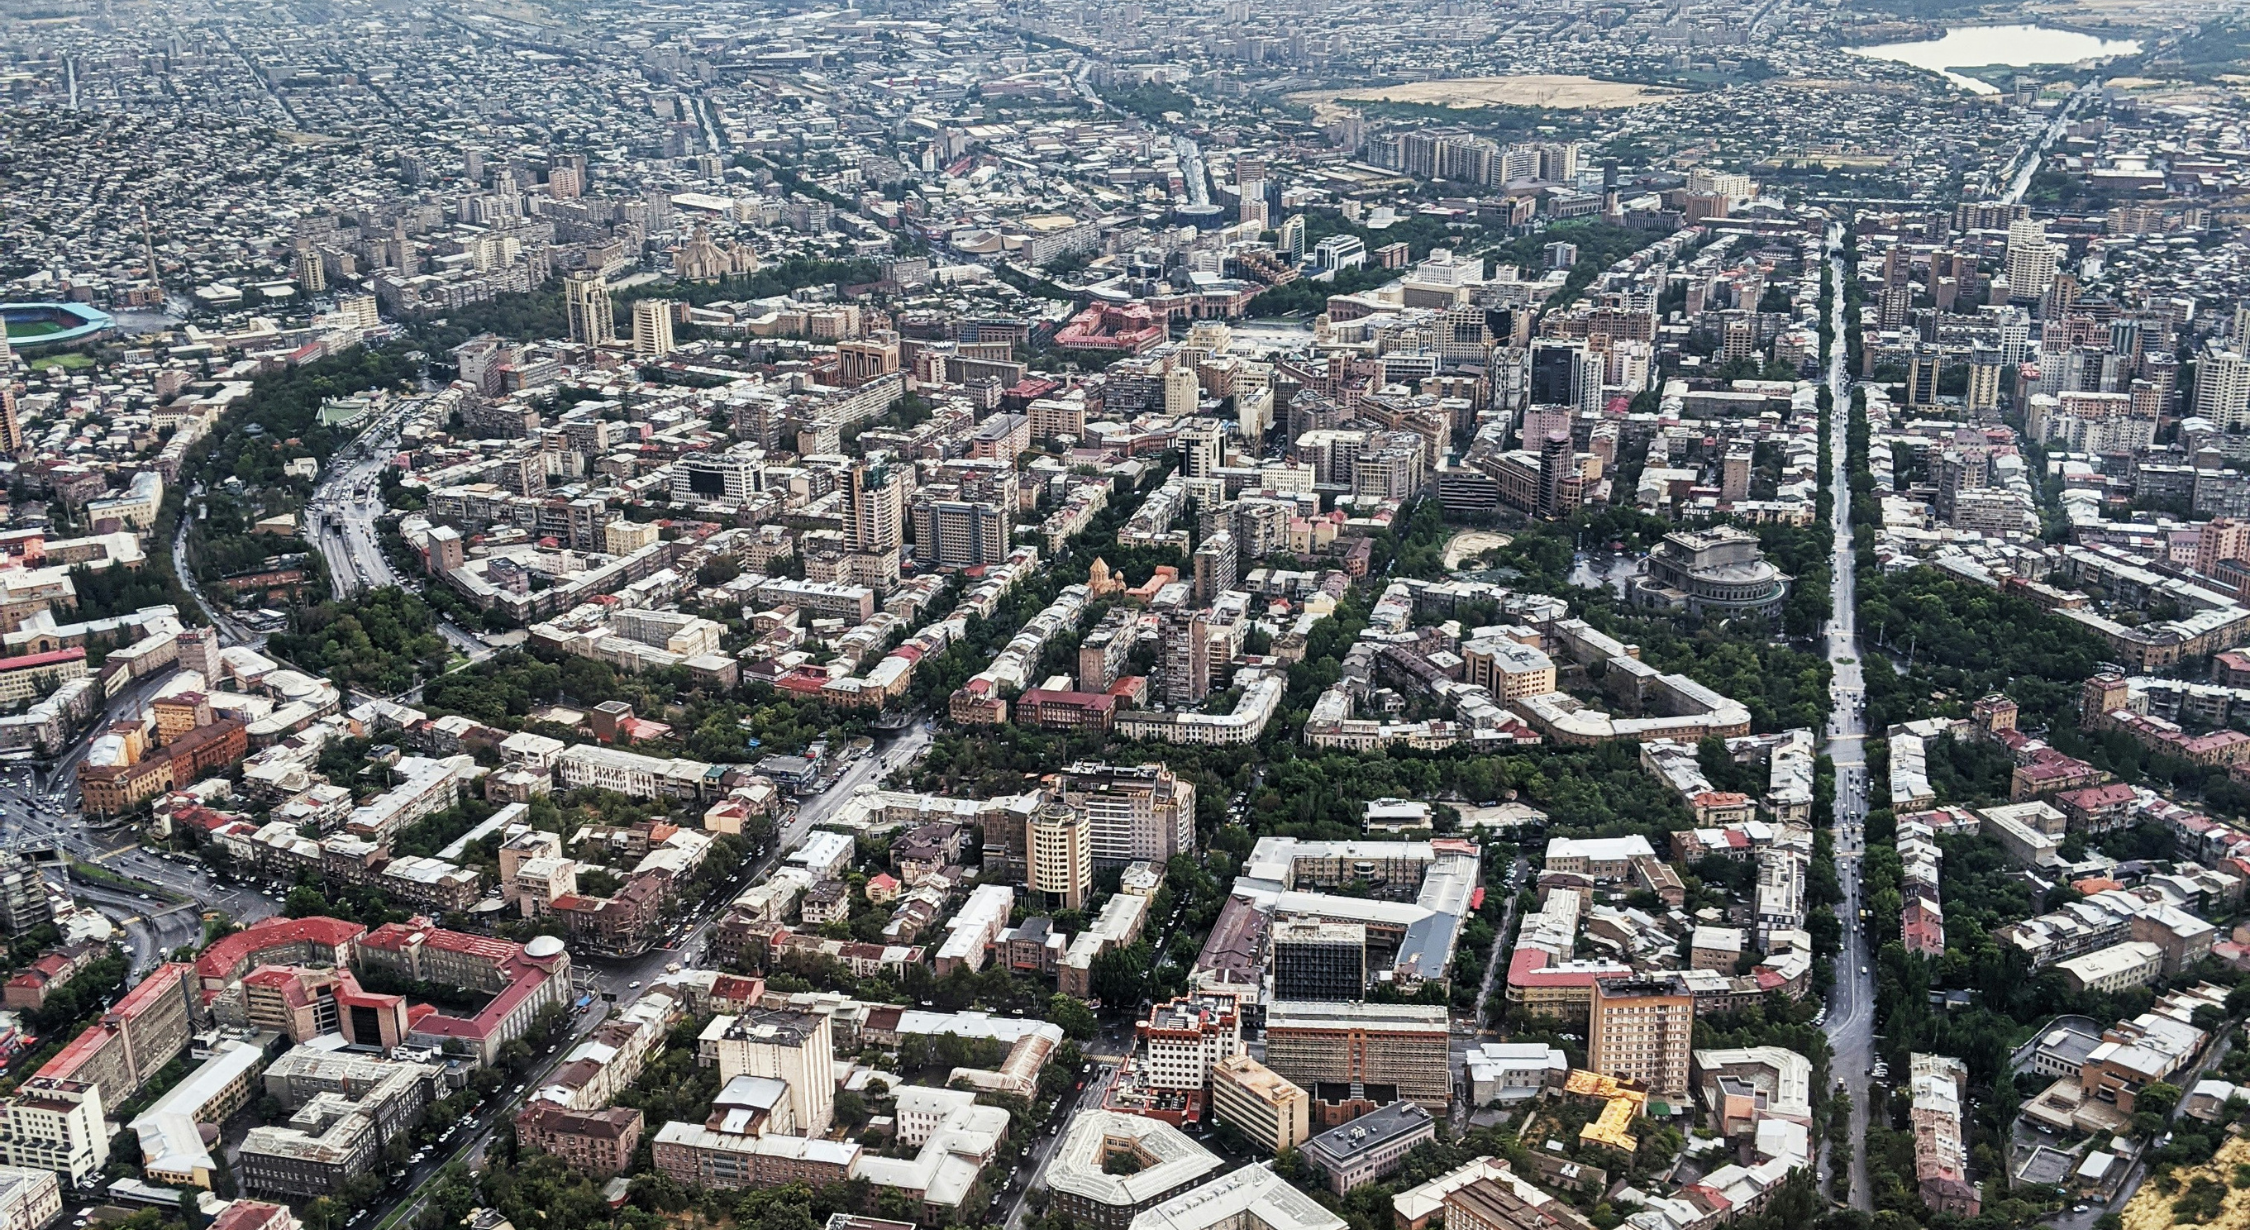 Aerial view of Yerevan, the capital and economic center of Armenia. (photo by Alexander Hovhannisyan/Unsplash).